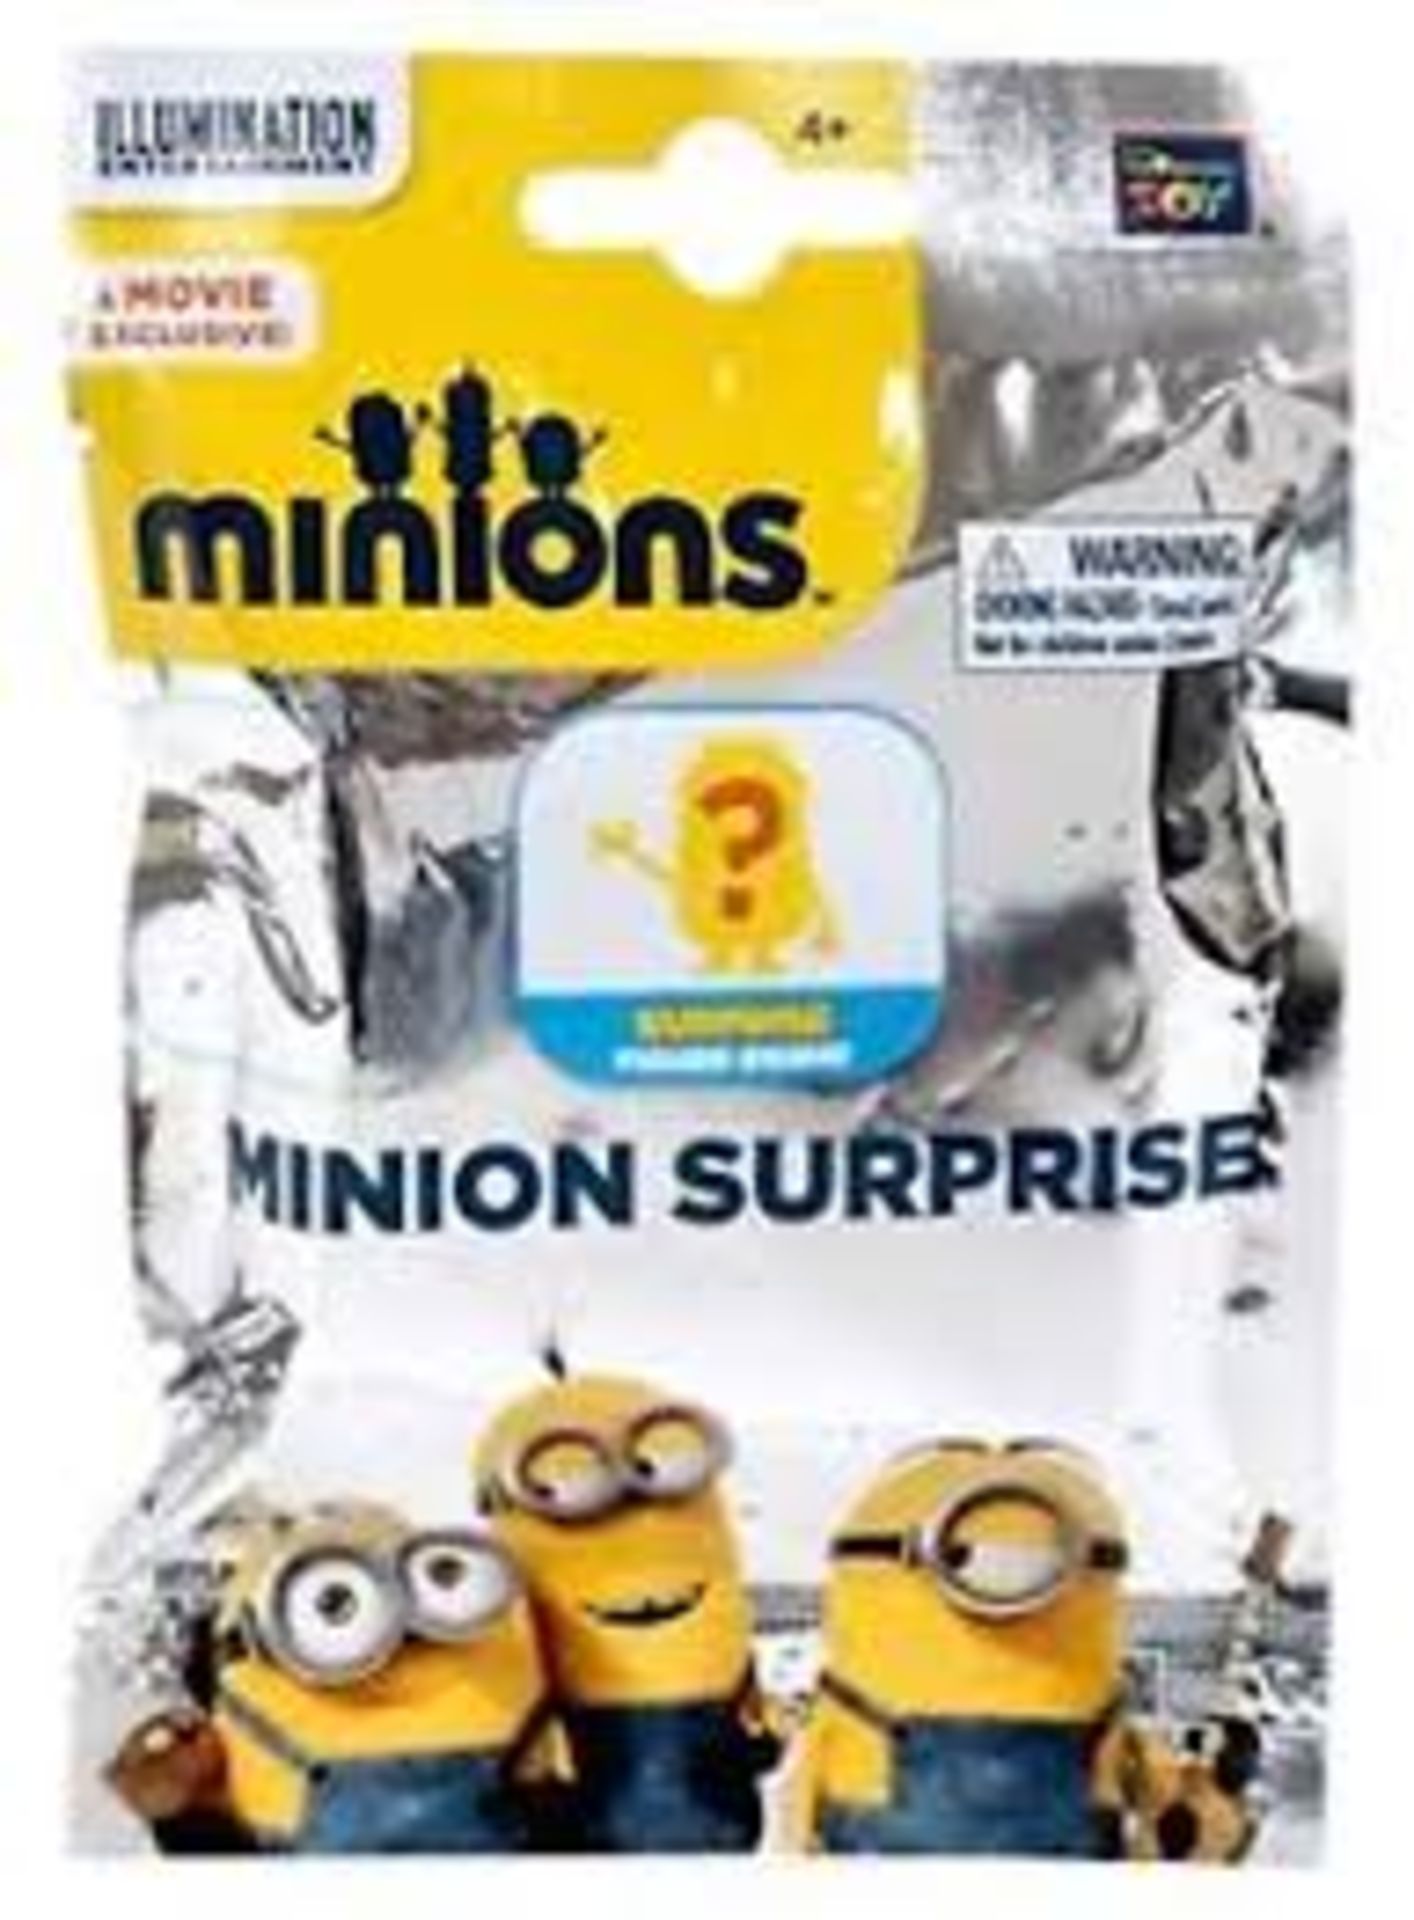 1917 x items Minions Mystery Packs, Nerf Rebelle & Jet Rocket | RRP £2726.88 - Image 2 of 3